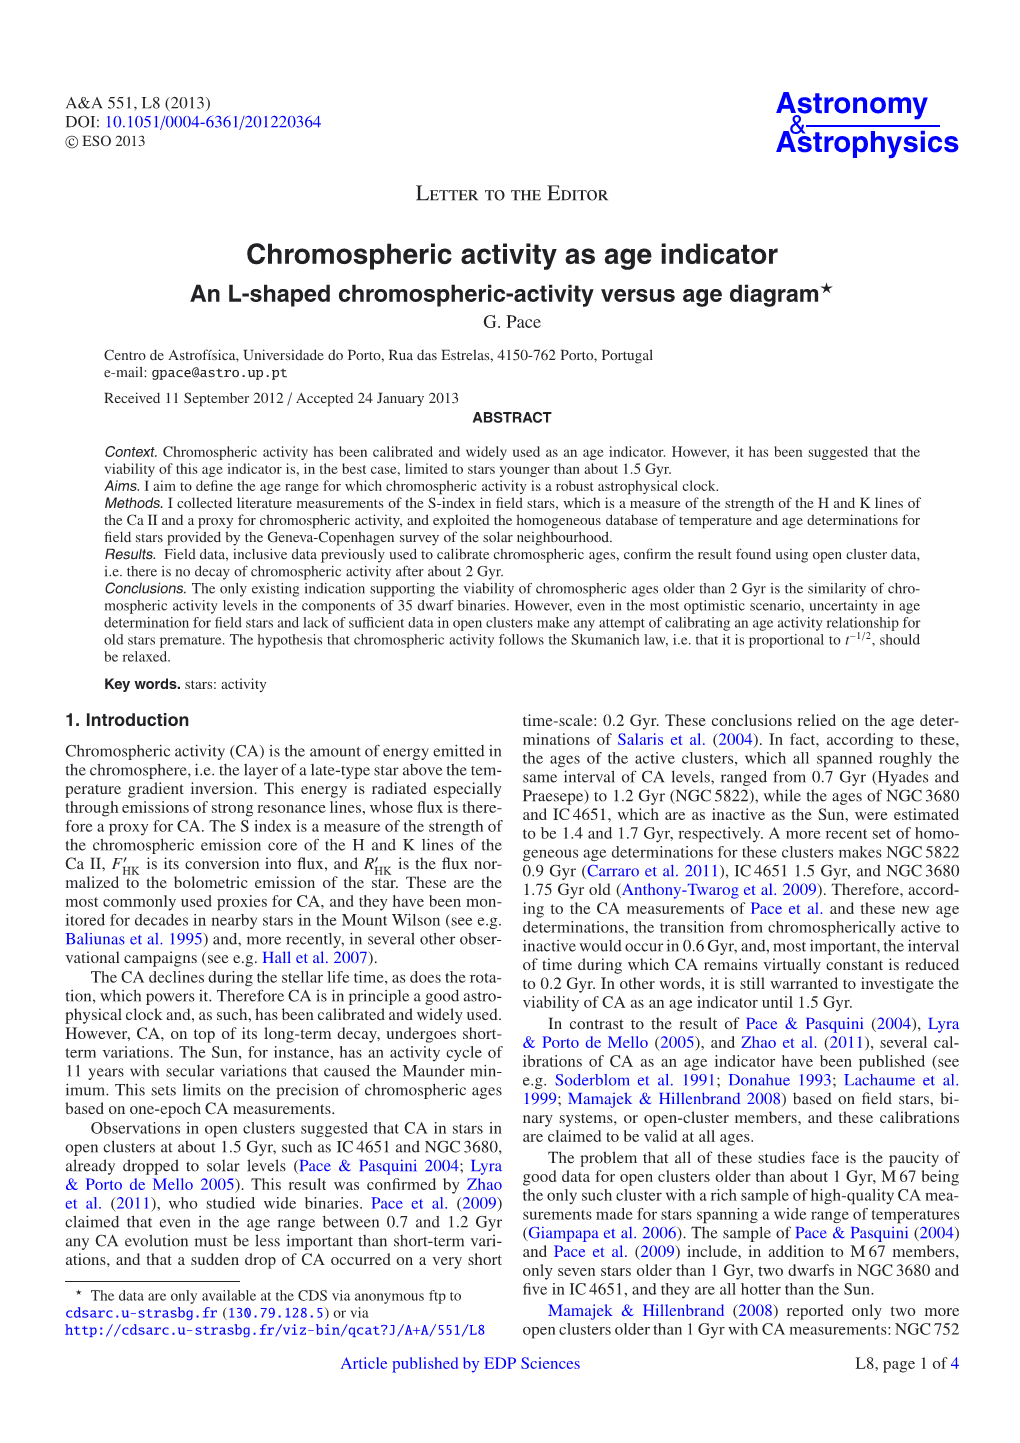 Chromospheric Activity As Age Indicator an L-Shaped Chromospheric-Activity Versus Age Diagram G